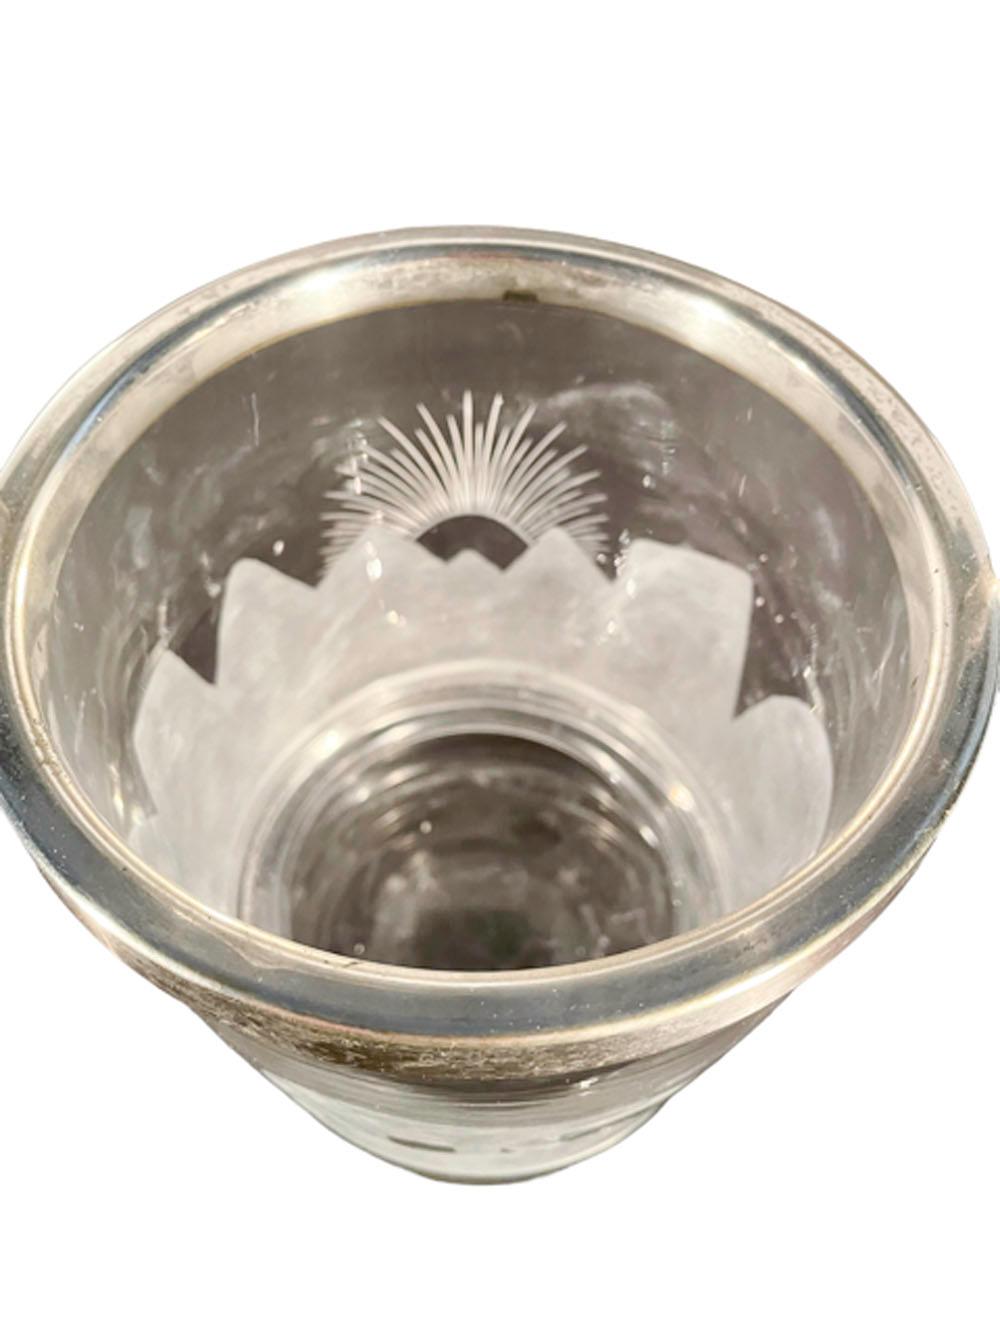 Art Deco Etched Glass and Silver Plate Ice Bucket W/ a Polar Bear on an Iceberg For Sale 1